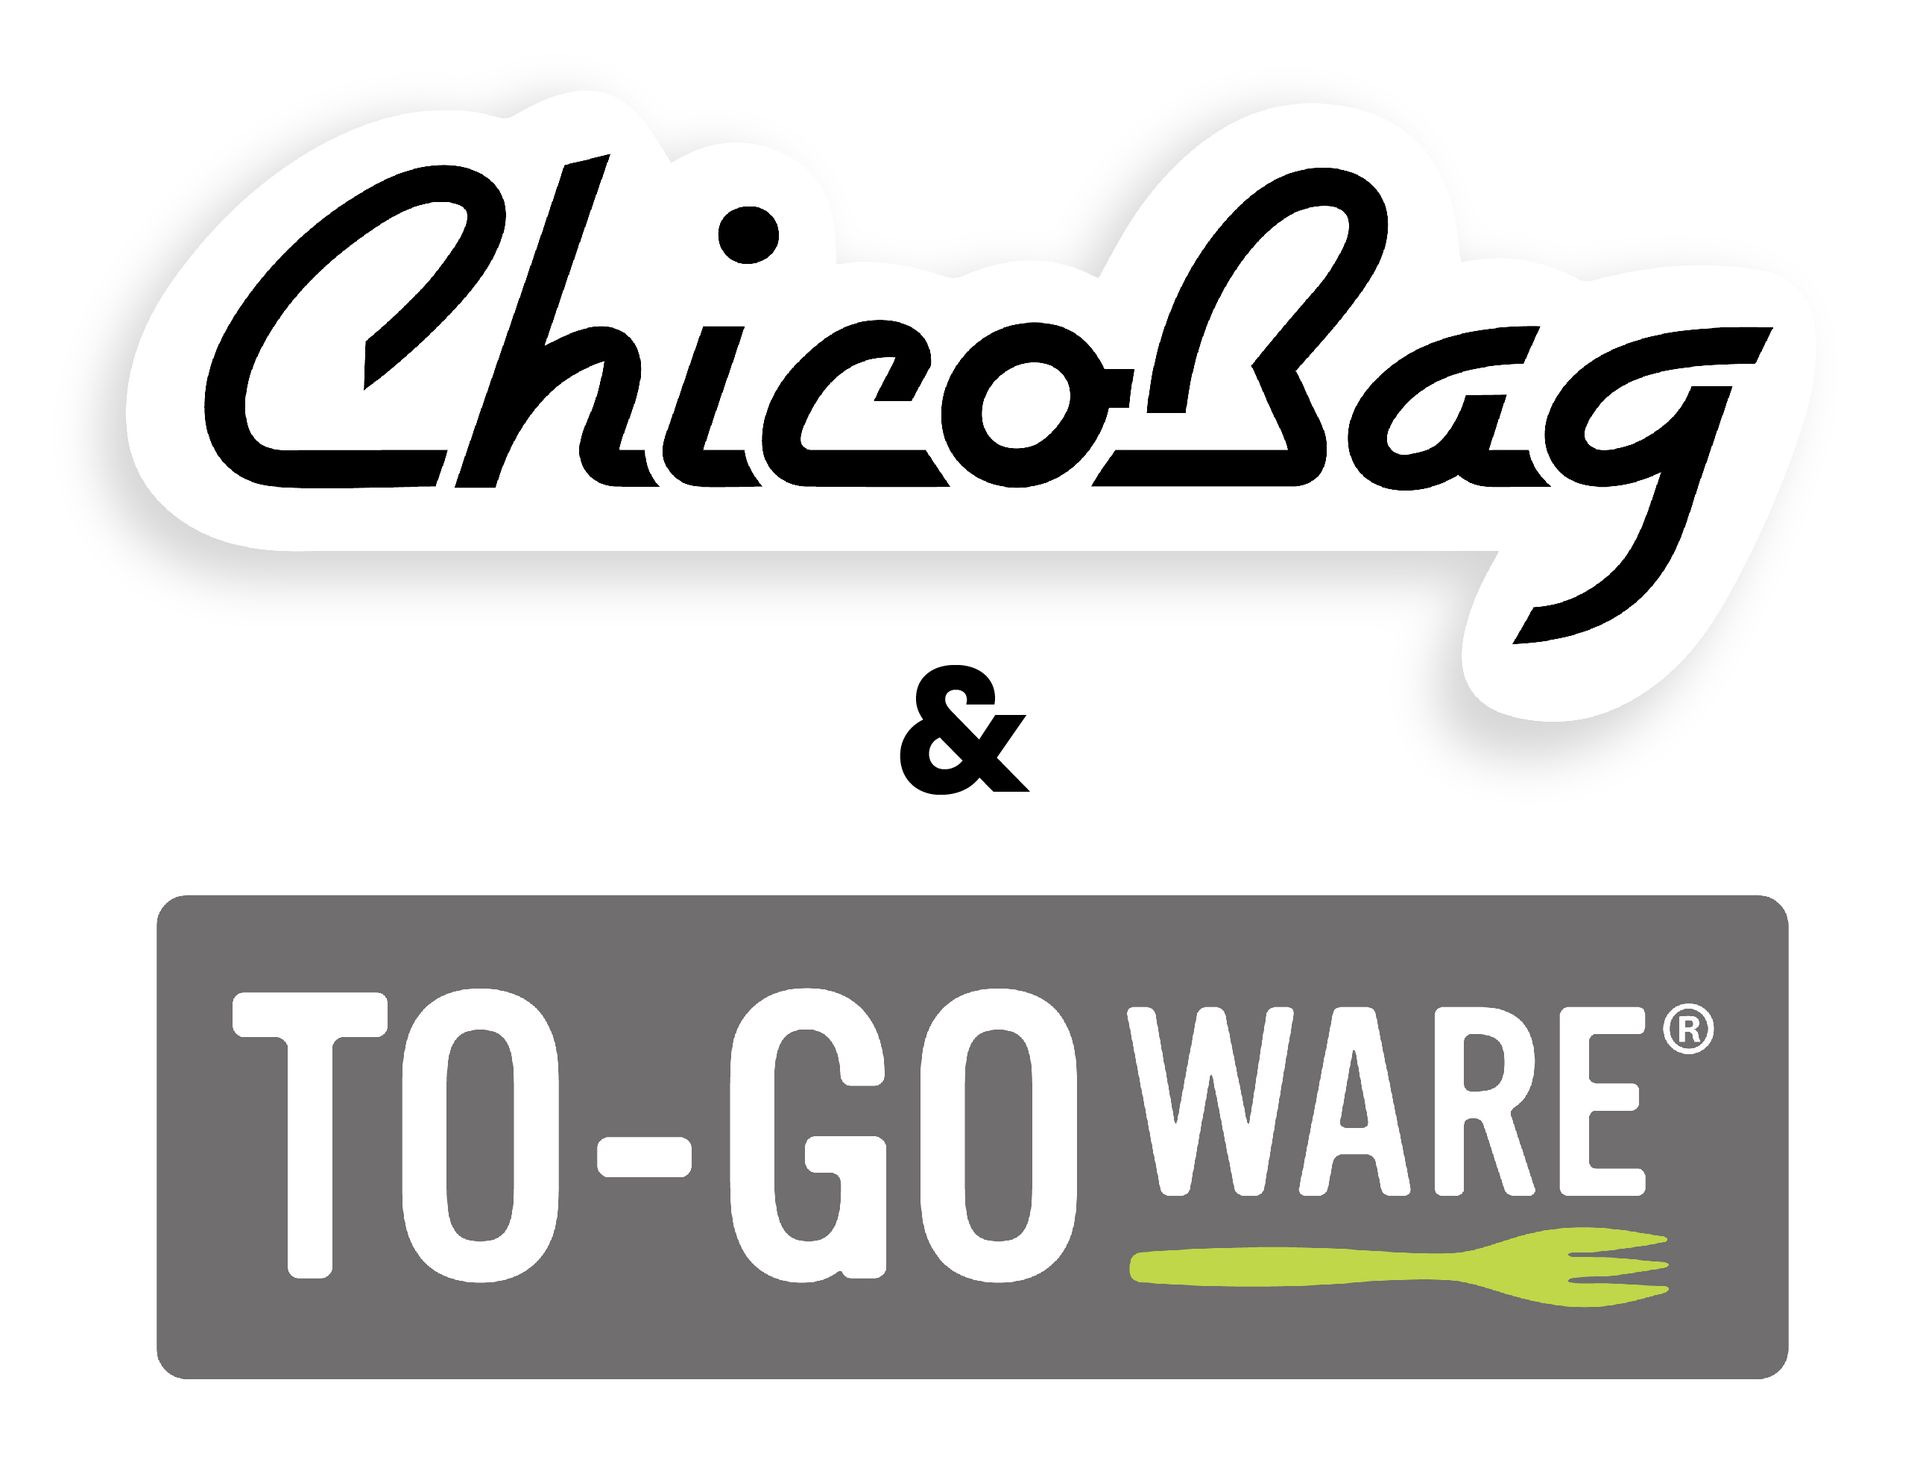 Chicobag and To-Go ware Logos